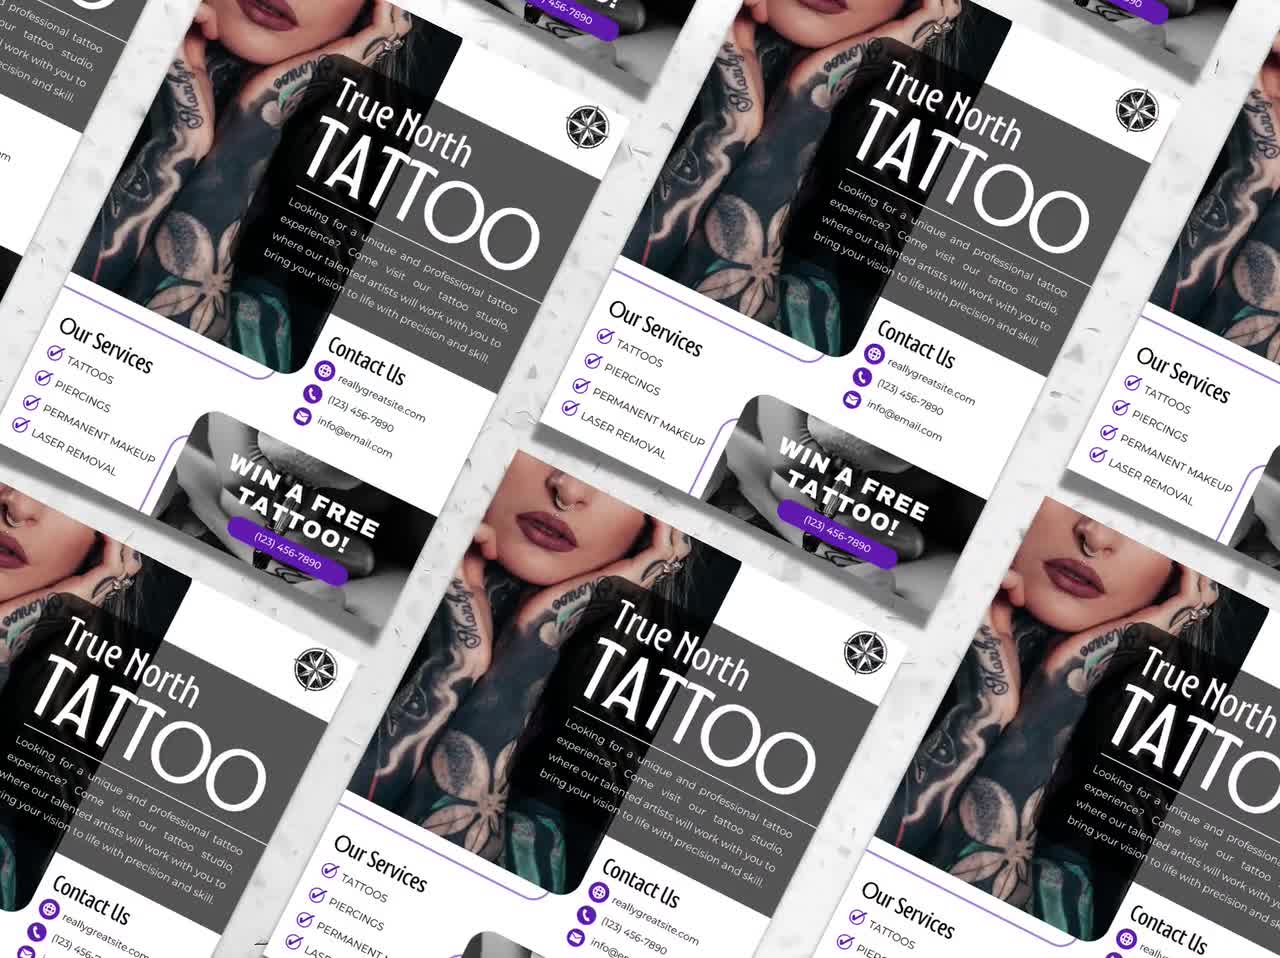 Tattoo Man PSD, 500+ High Quality Free PSD Templates for Download